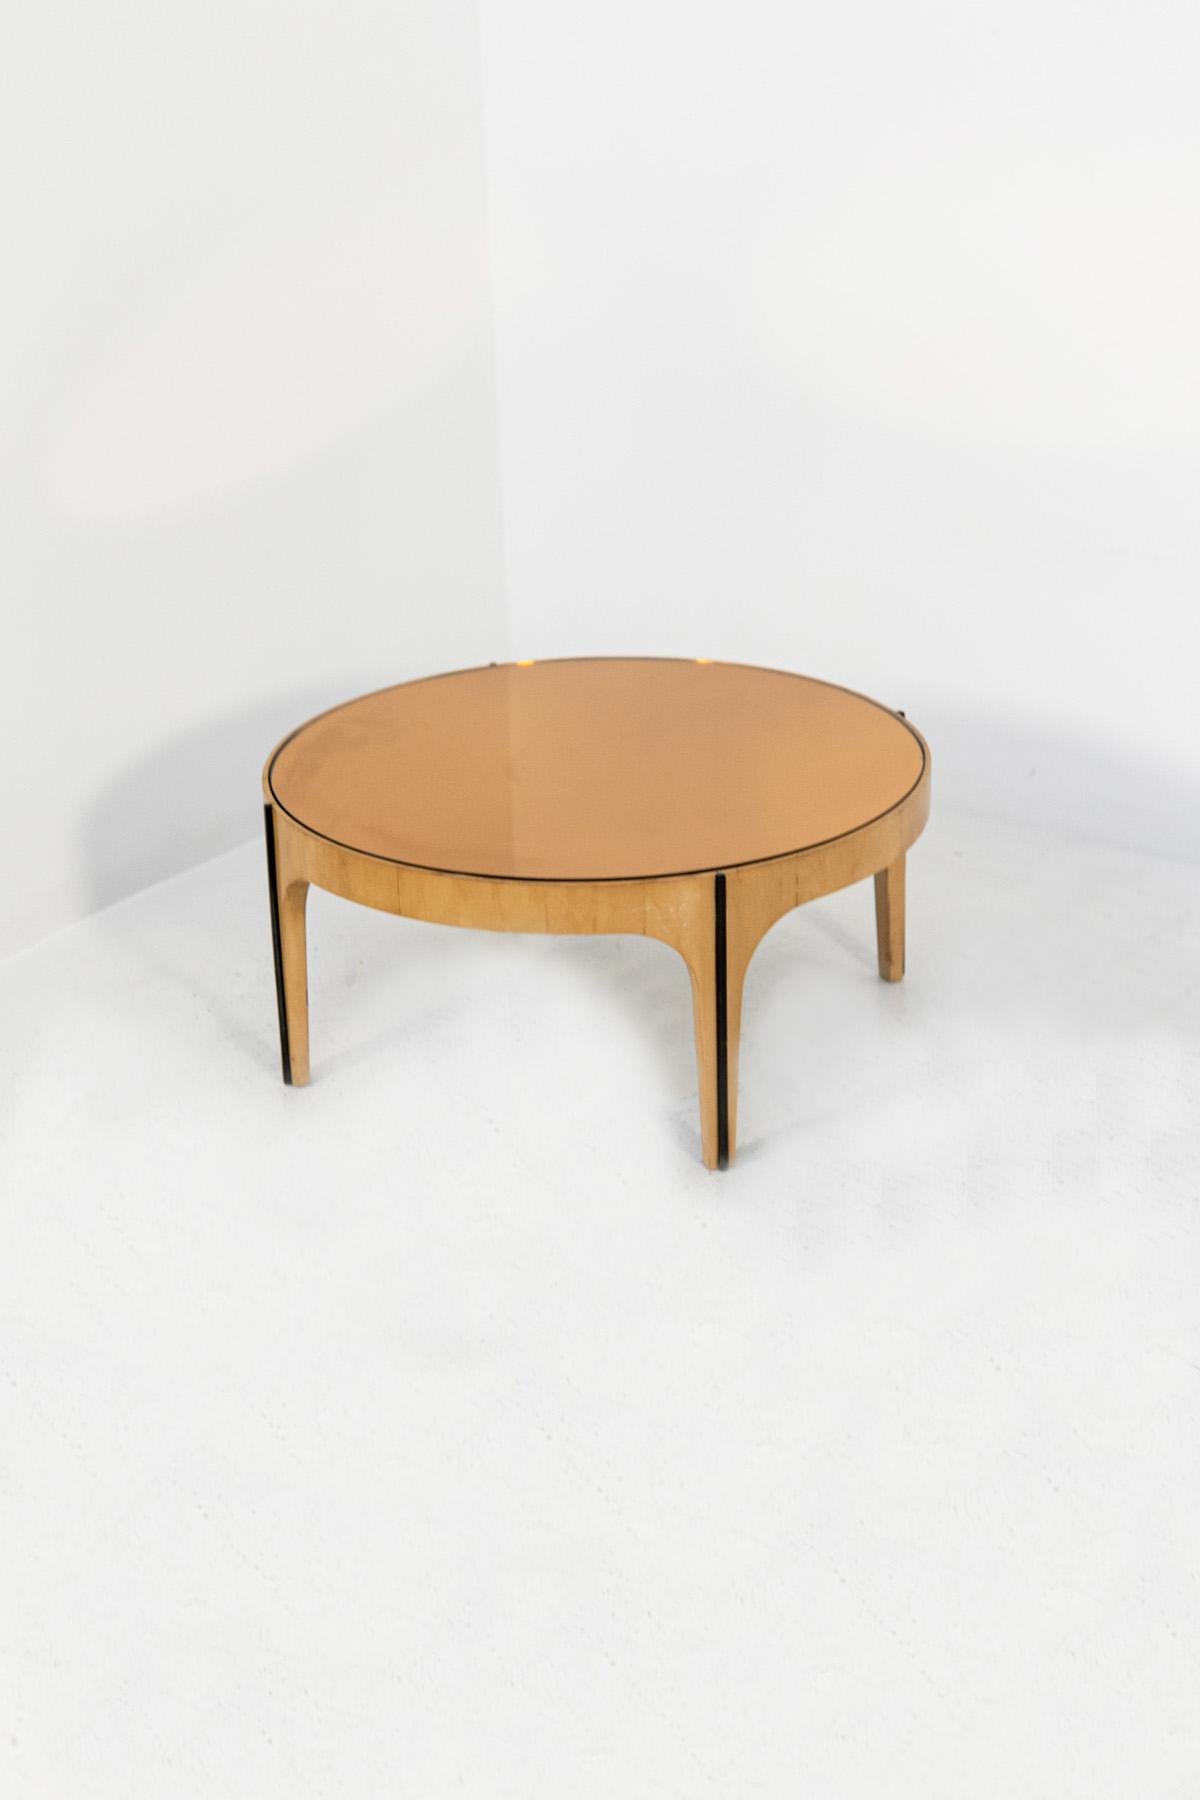 The vintage coffee table from the 50s is made by the famous Italian manufacturer Fontana Arte. The table is in maple wood and the table top is made of mirrored glass. The round table has 4 legs on which an elegant dark wooden line was applied as